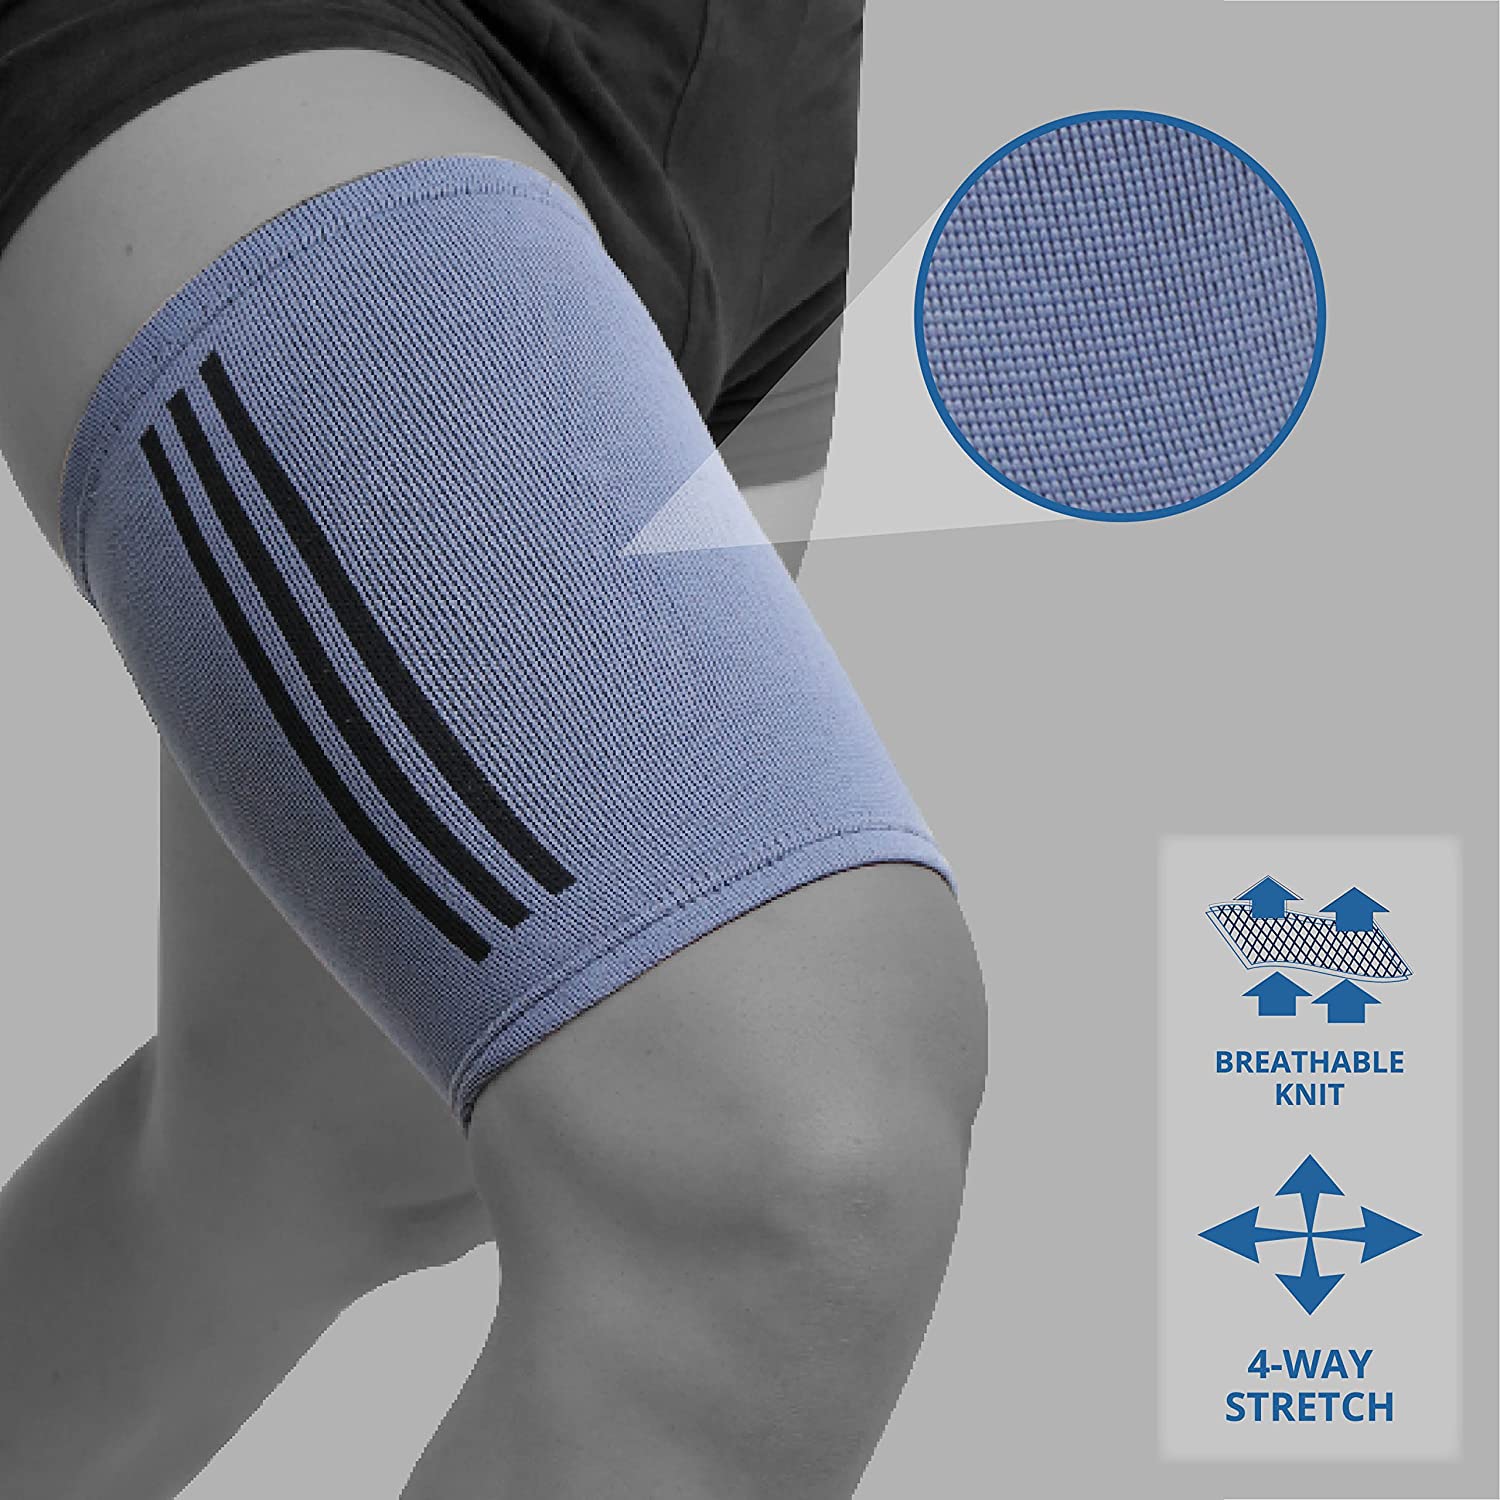 Thigh support sleeve by Kedley | Elastic compression band ideal for ...